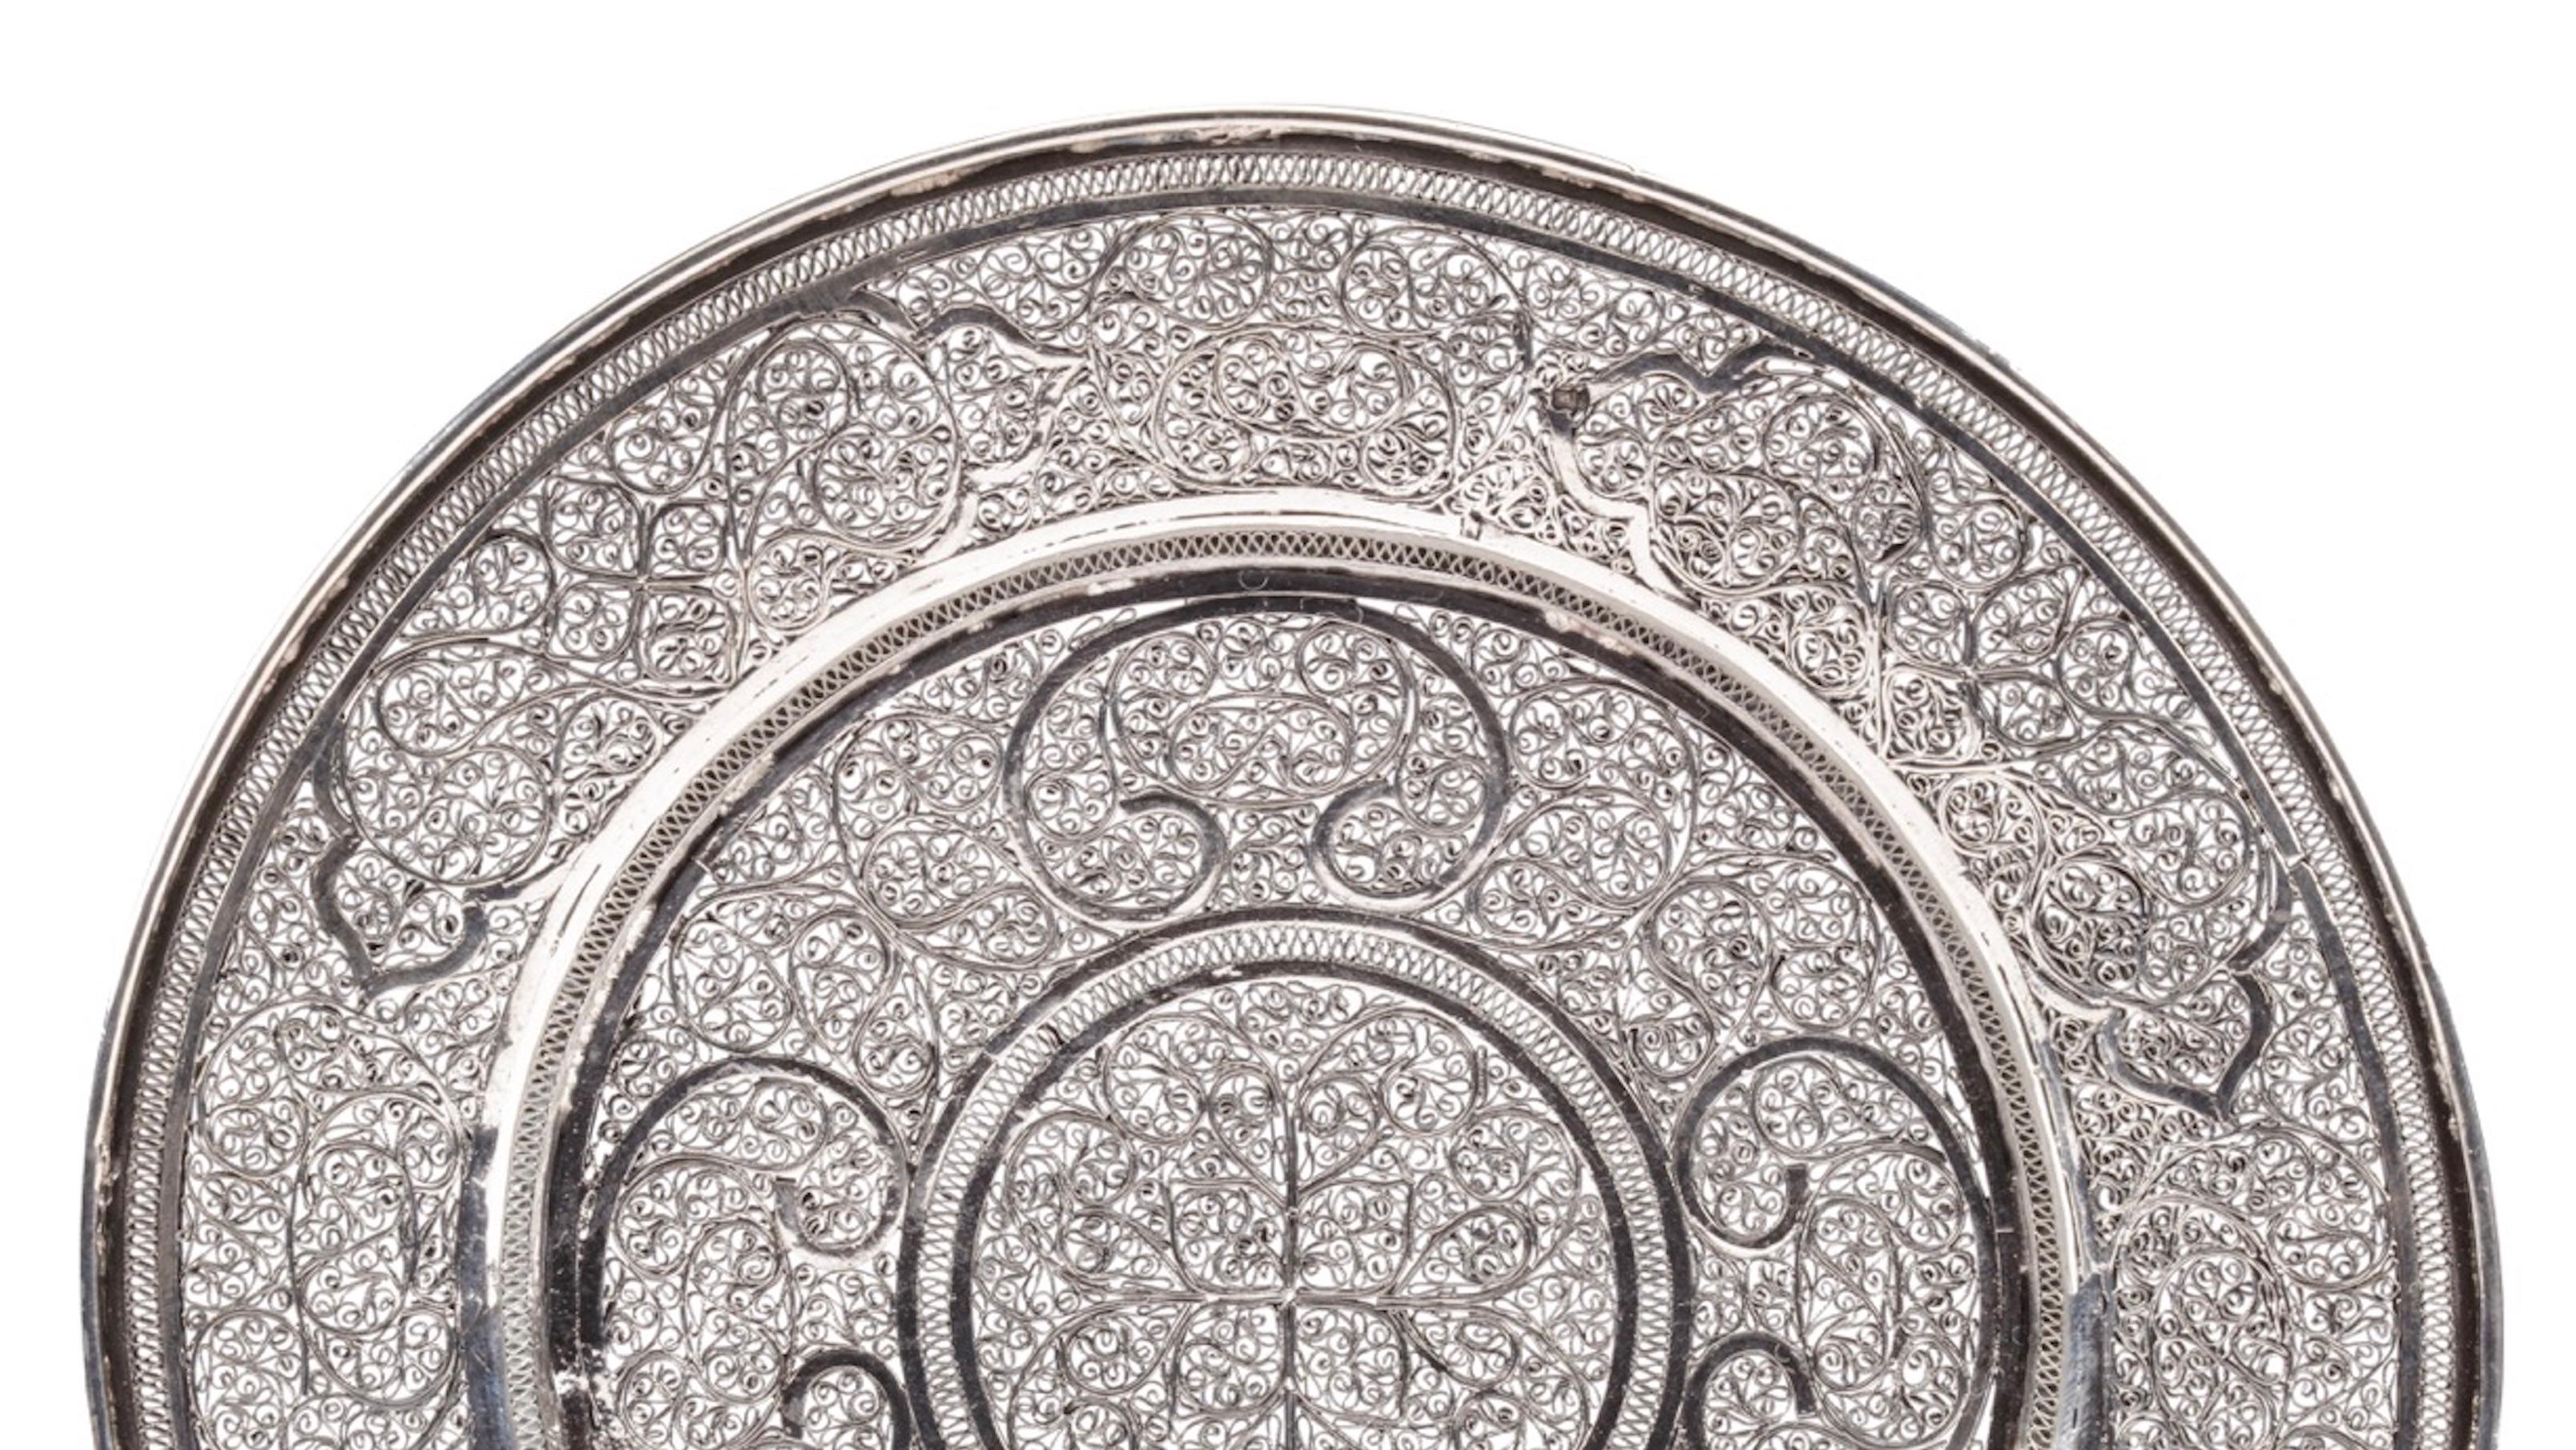 A splendid and heavy Dutch-colonial silver filigree salver

Indonesia, Batavia (Jakarta) or possibly Padang, West Sumatra, 2nd half 17th century


Diam. 22.9 cm
Weight 551 grams

This filigree-work was probably done by Chinese masters